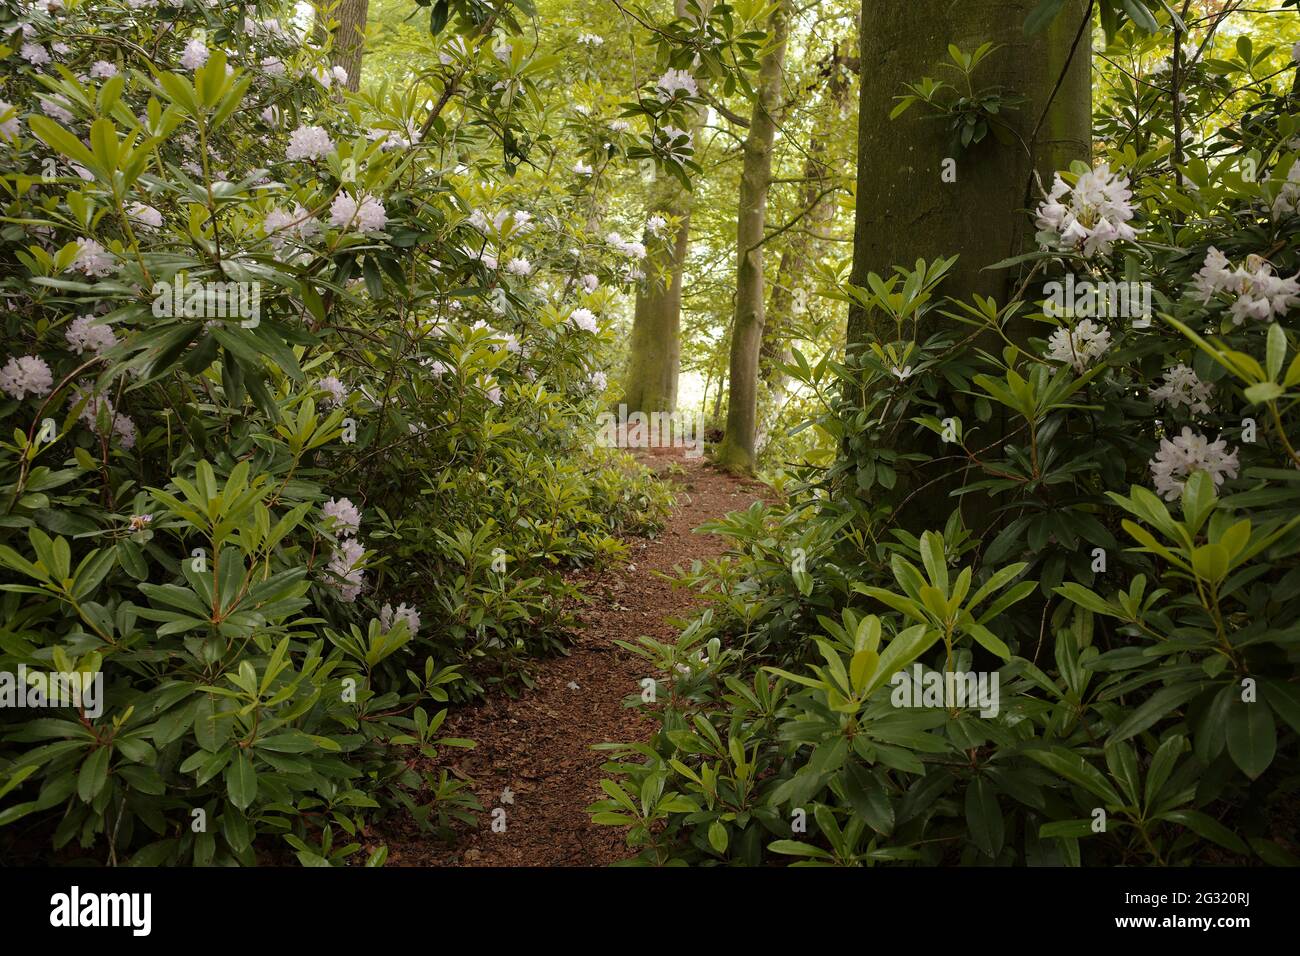 Path through a park with trees and light pink-purple, almost white rhododendron shrubs in bloom Stock Photo